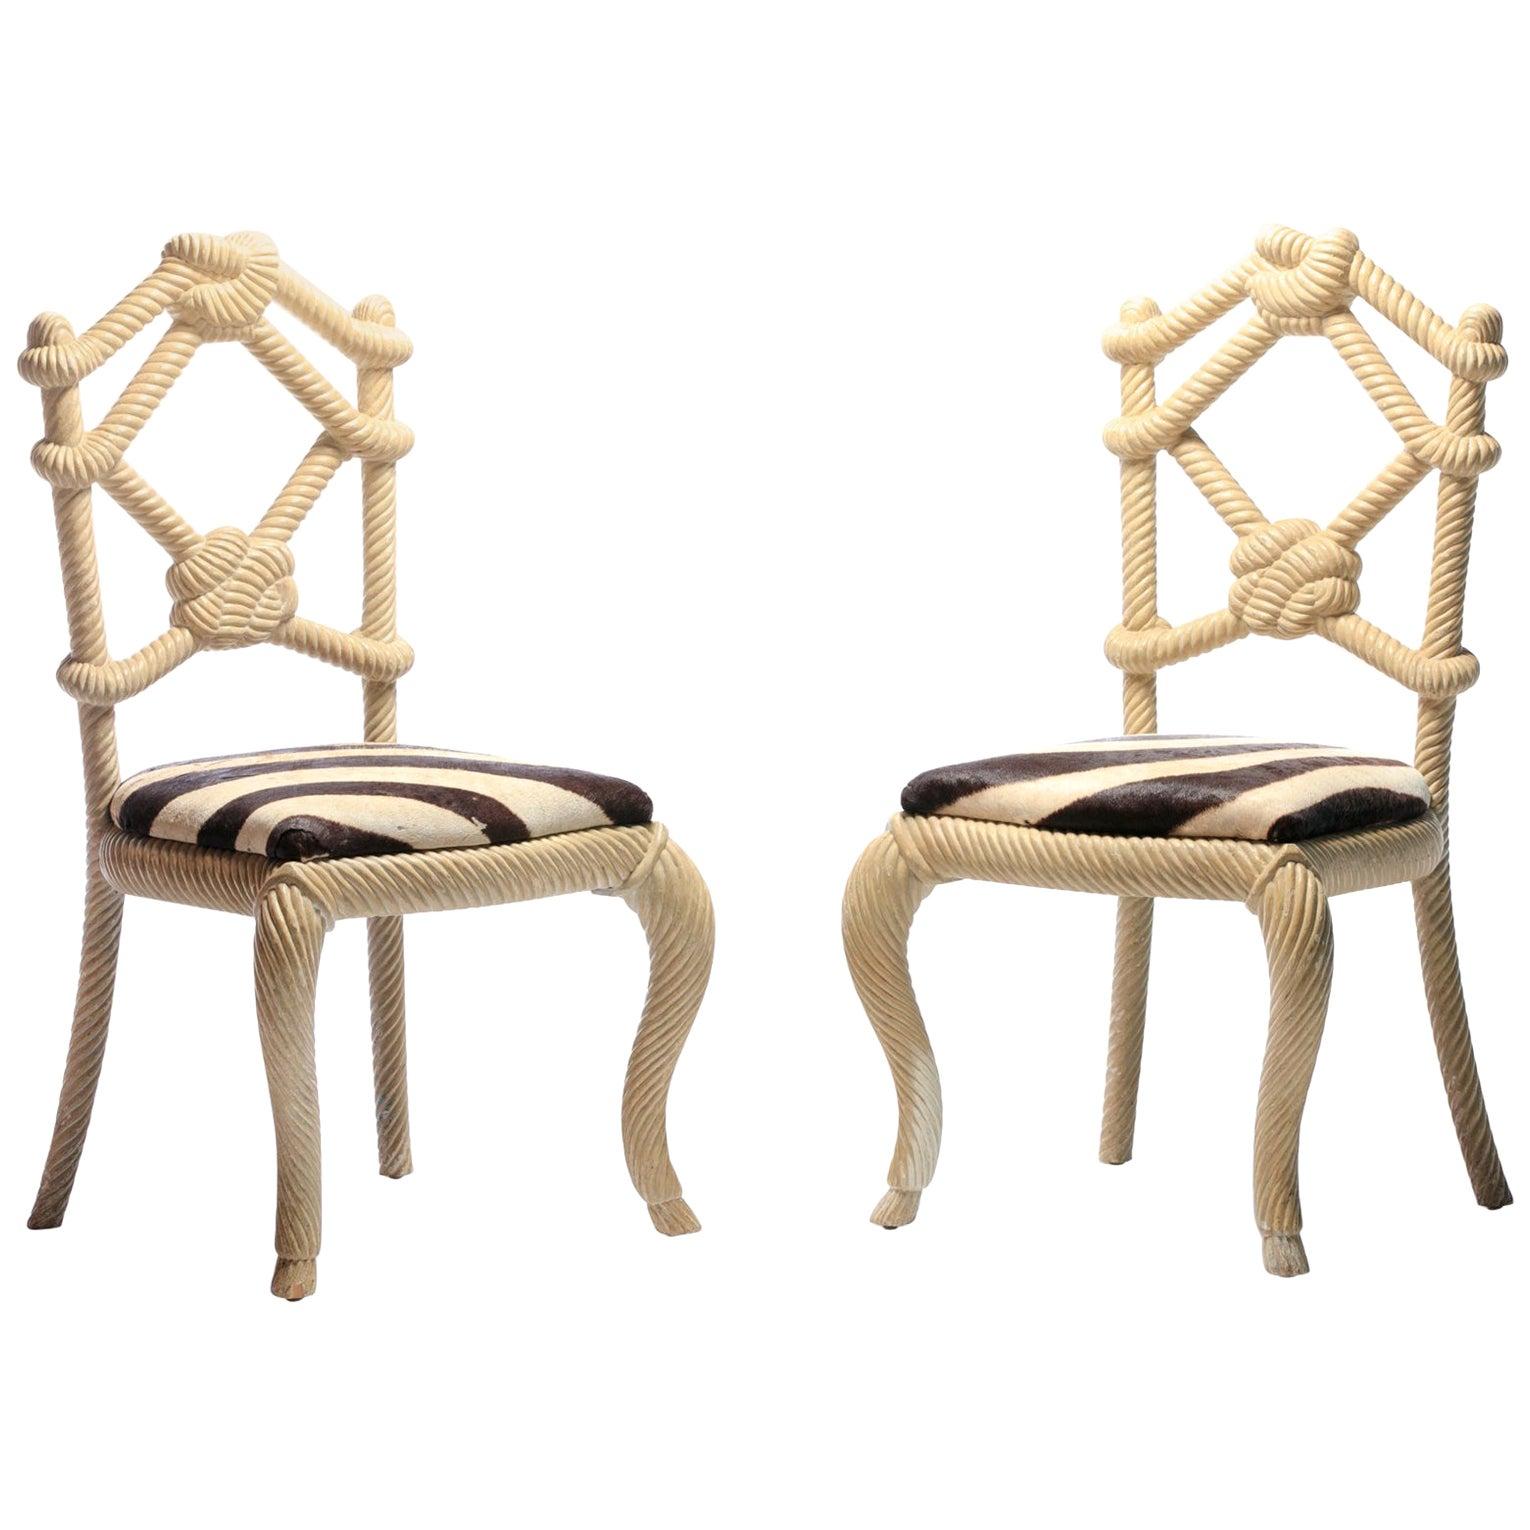 Pair of Rope Chairs from Viceroy Miami with Zebra Hide Upholstered Seats